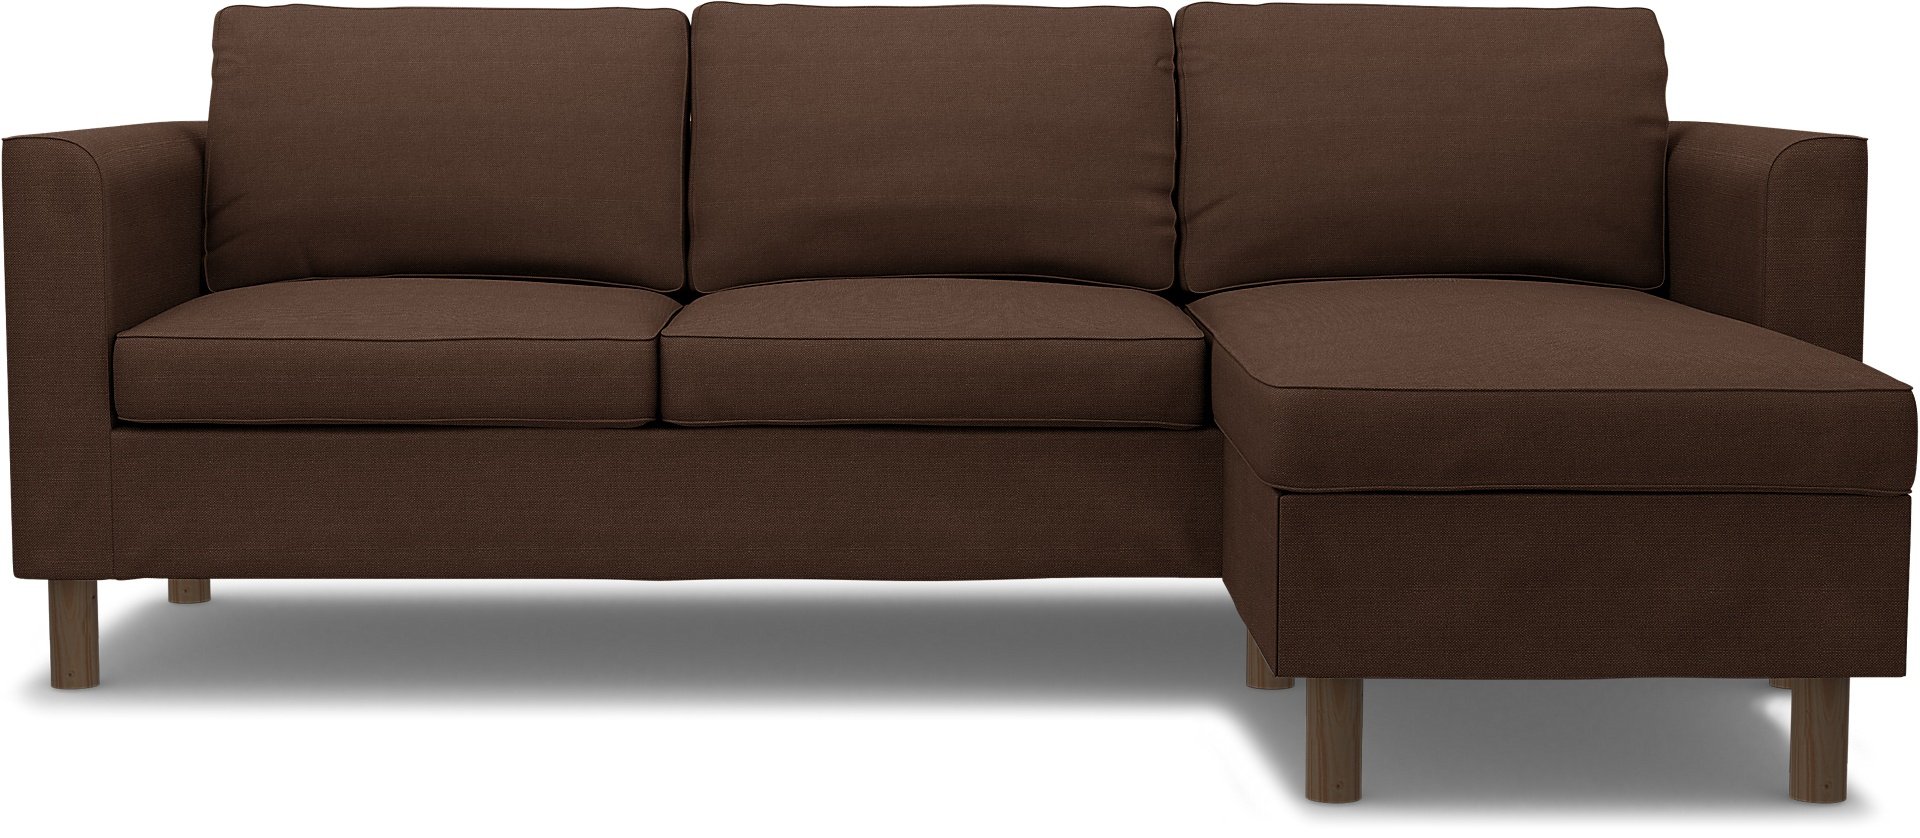 IKEA - Parup 3 Seater with chaise longue, Chocolate, Linen - Bemz